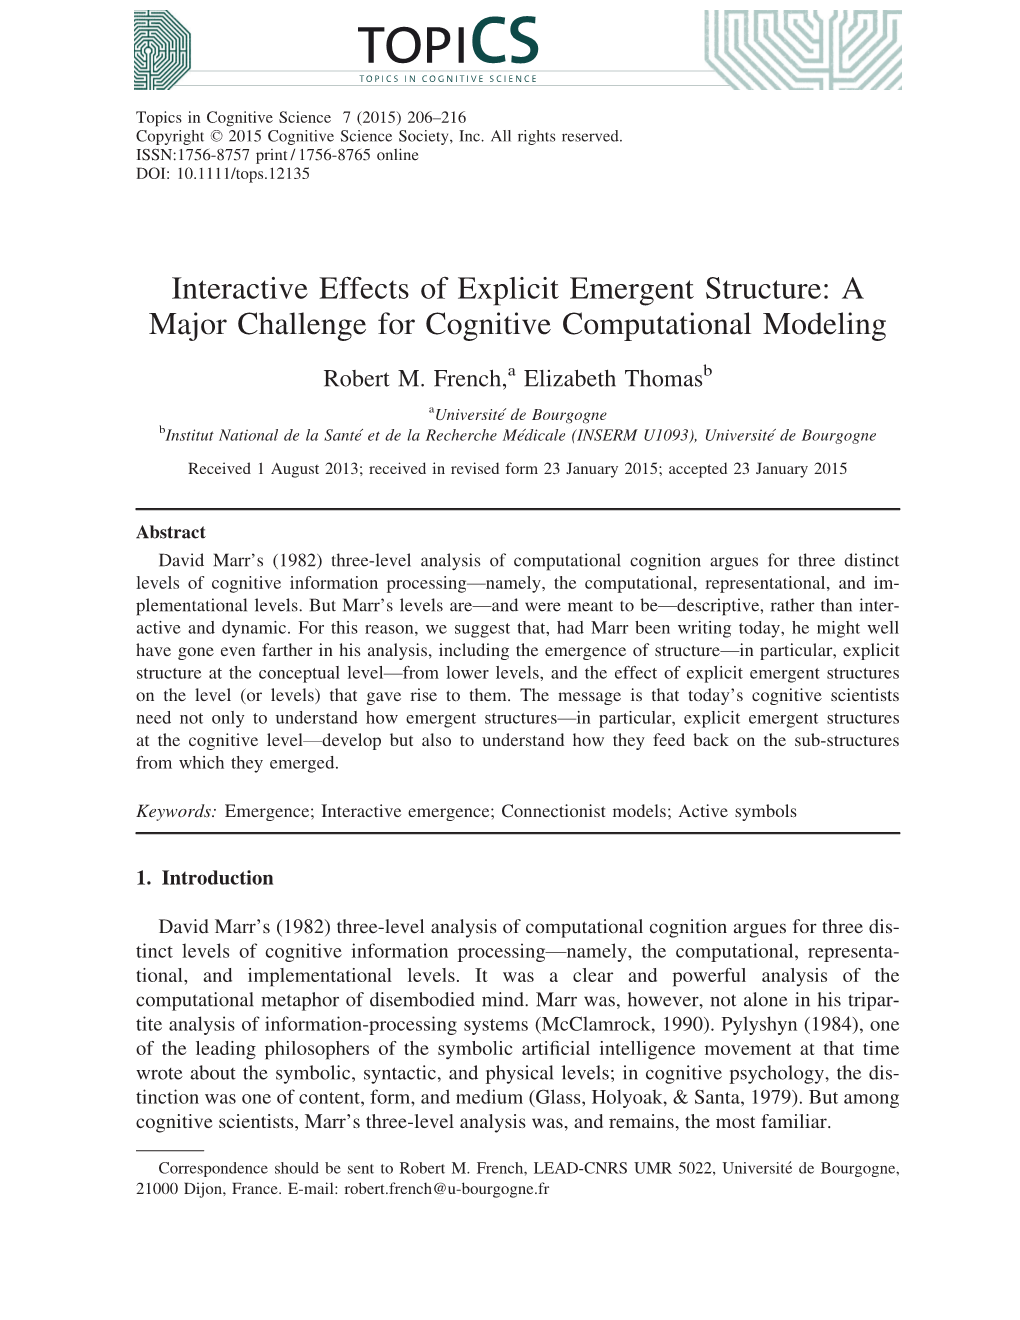 Interactive Effects of Explicit Emergent Structure: a Major Challenge for Cognitive Computational Modeling